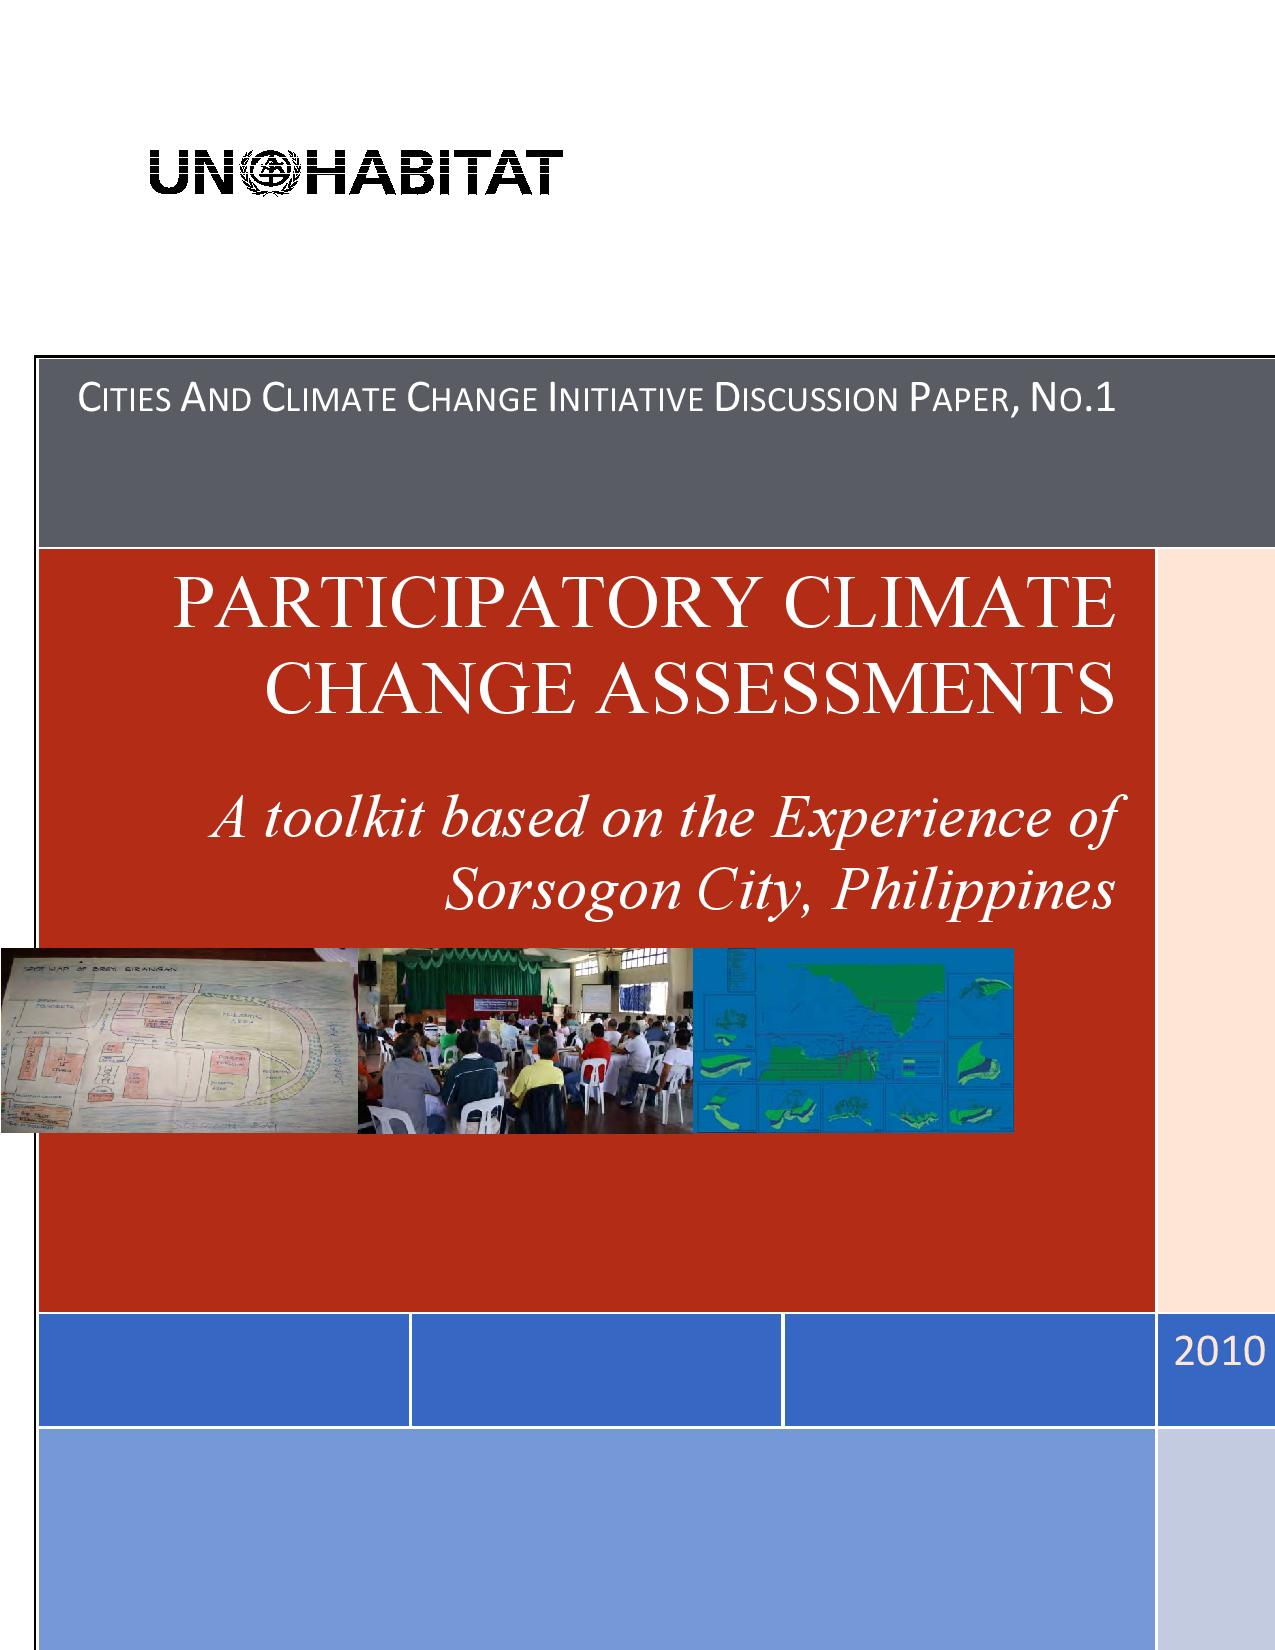 Participatory Climate Change Assessments: A Toolkit Based on the Experience of Sorsogon City, Philippines (2010) – CCCI